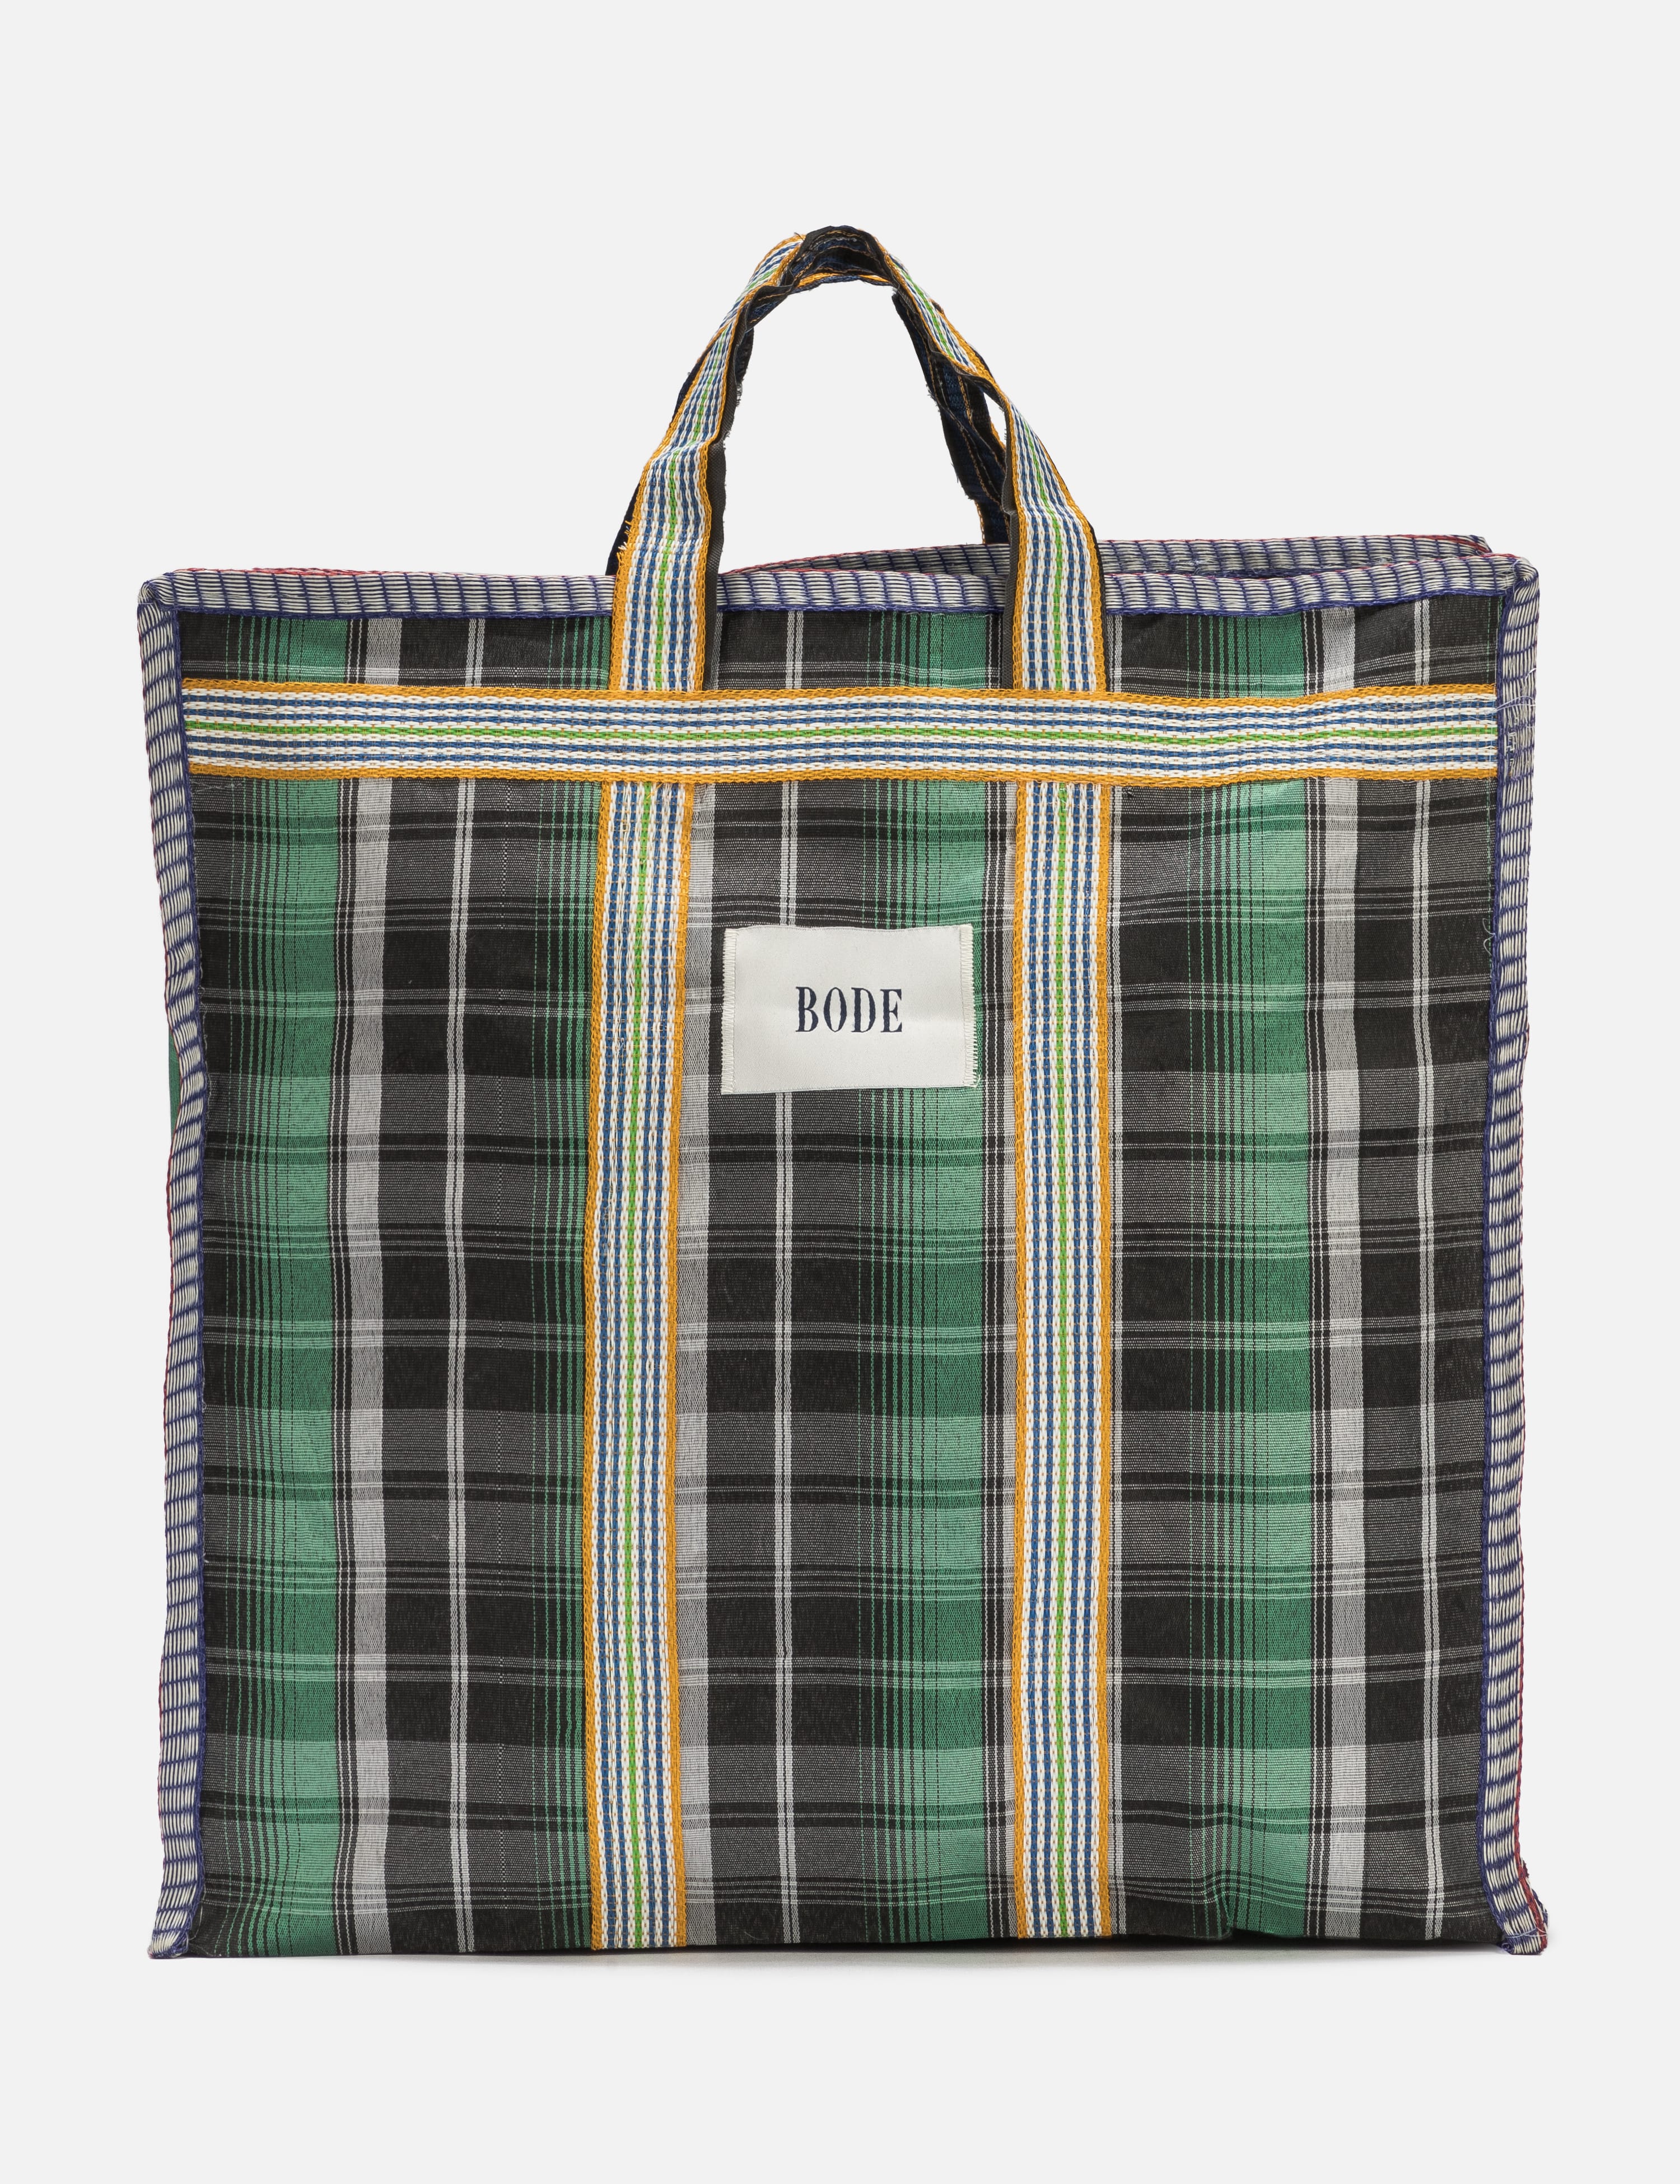 BODE - BODE MARKET TOTE BAG | HBX - Globally Curated Fashion and